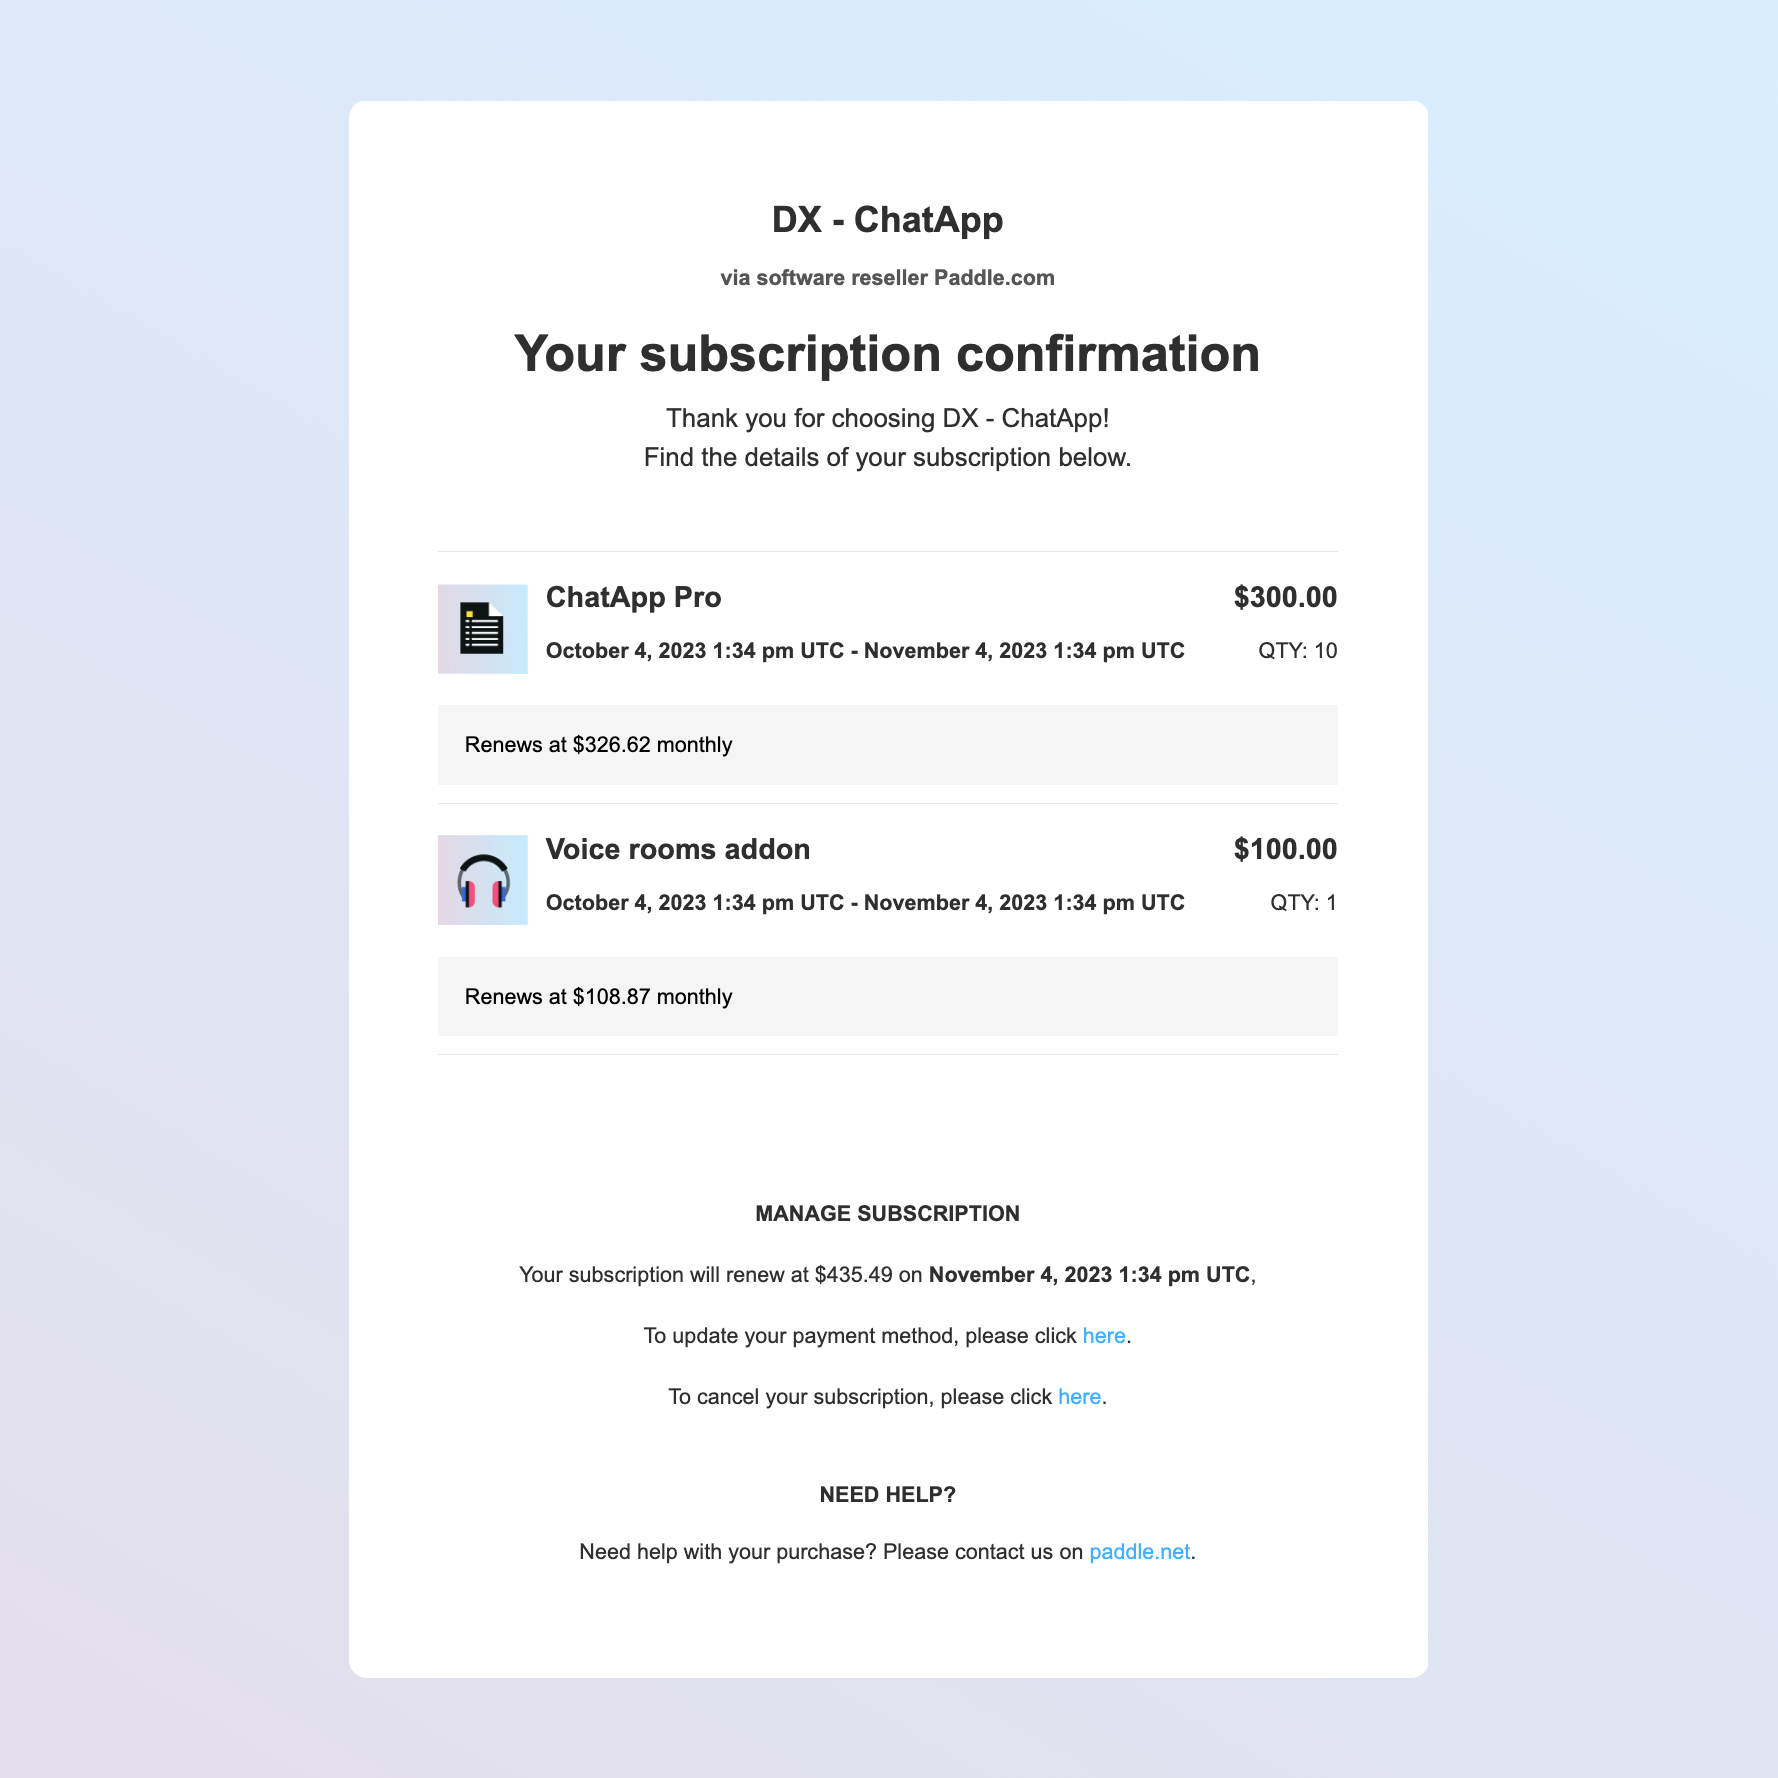 Screenshot showing a subscription confirmation email. It includes a list of items, total, and renewal dates. There are links to cancel and update payment method.